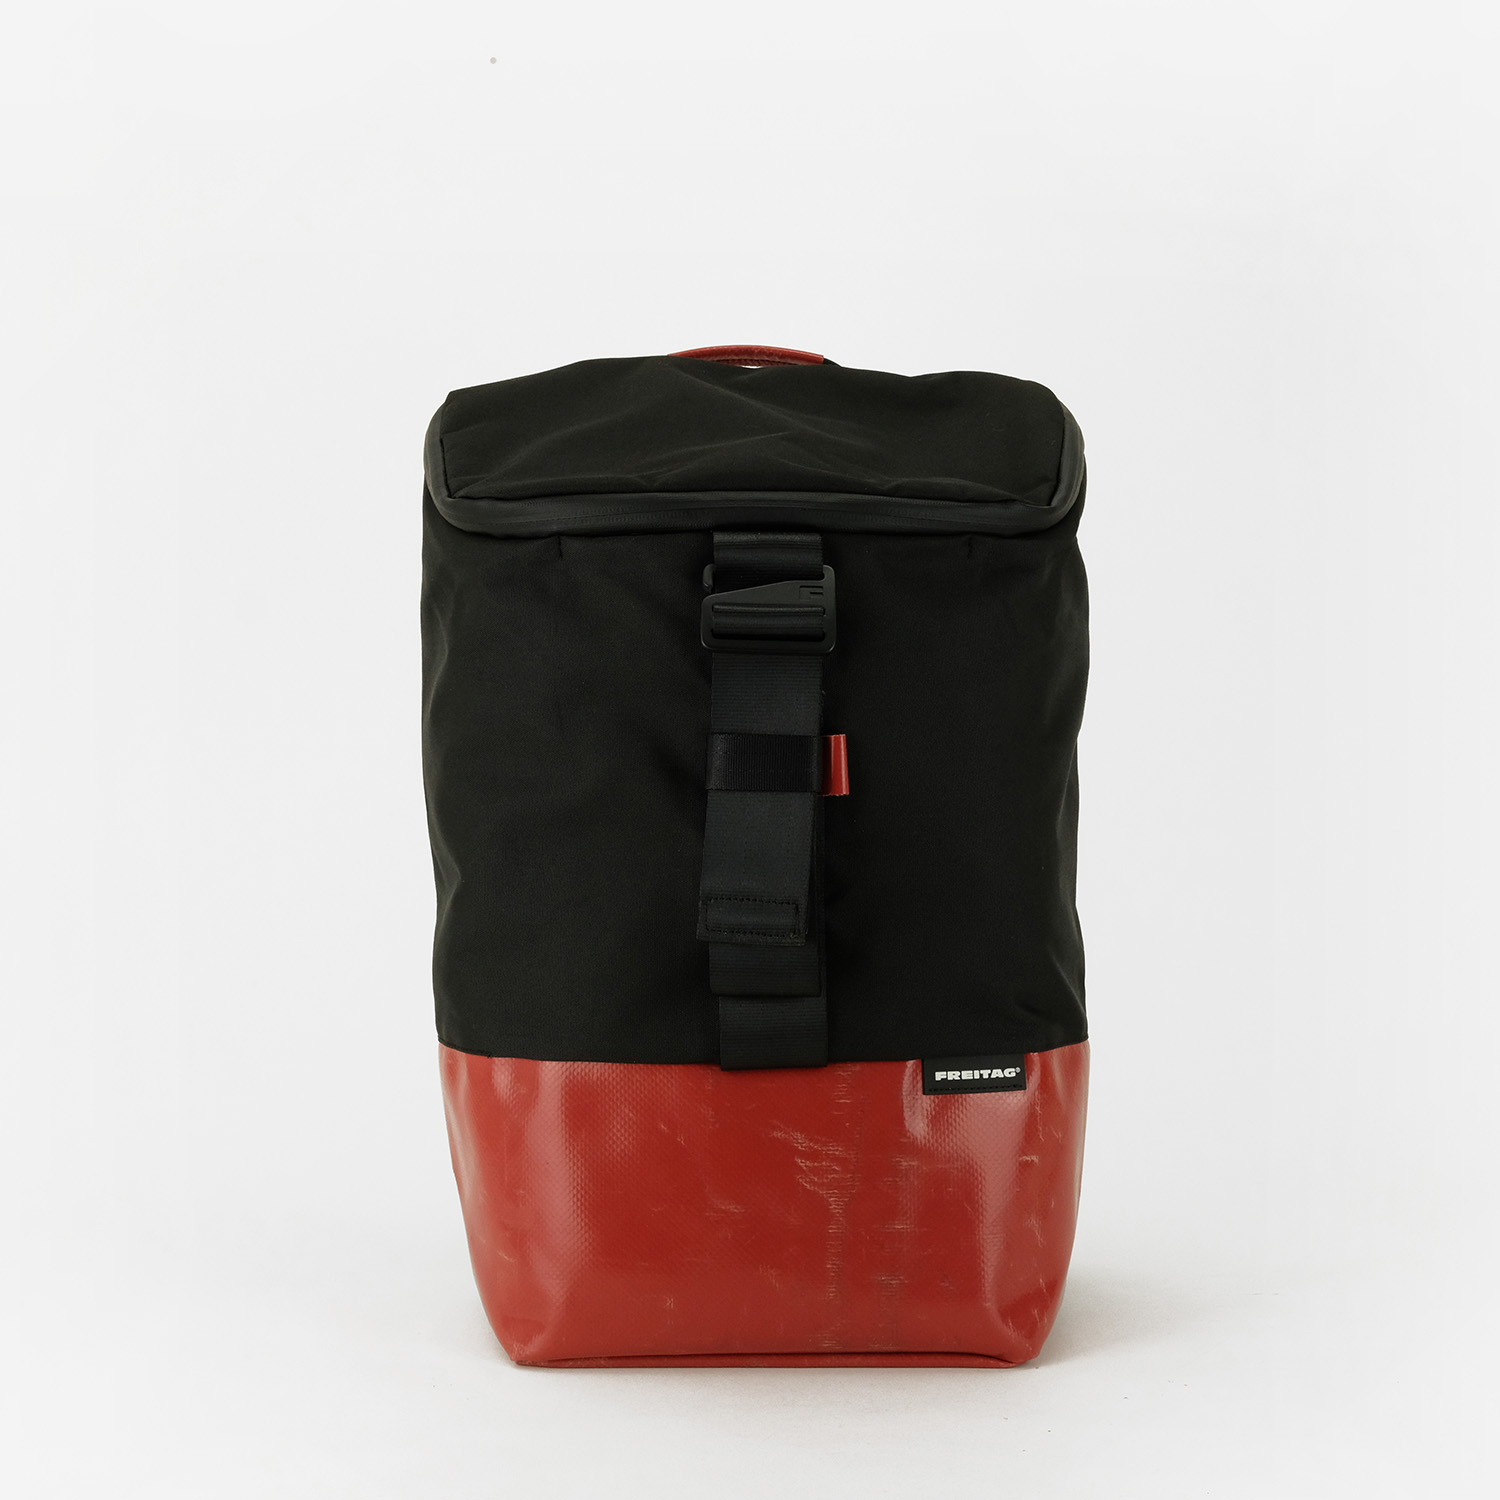 FREITAG :: CARTER F600 :: Rainproof and light backpack, with padded